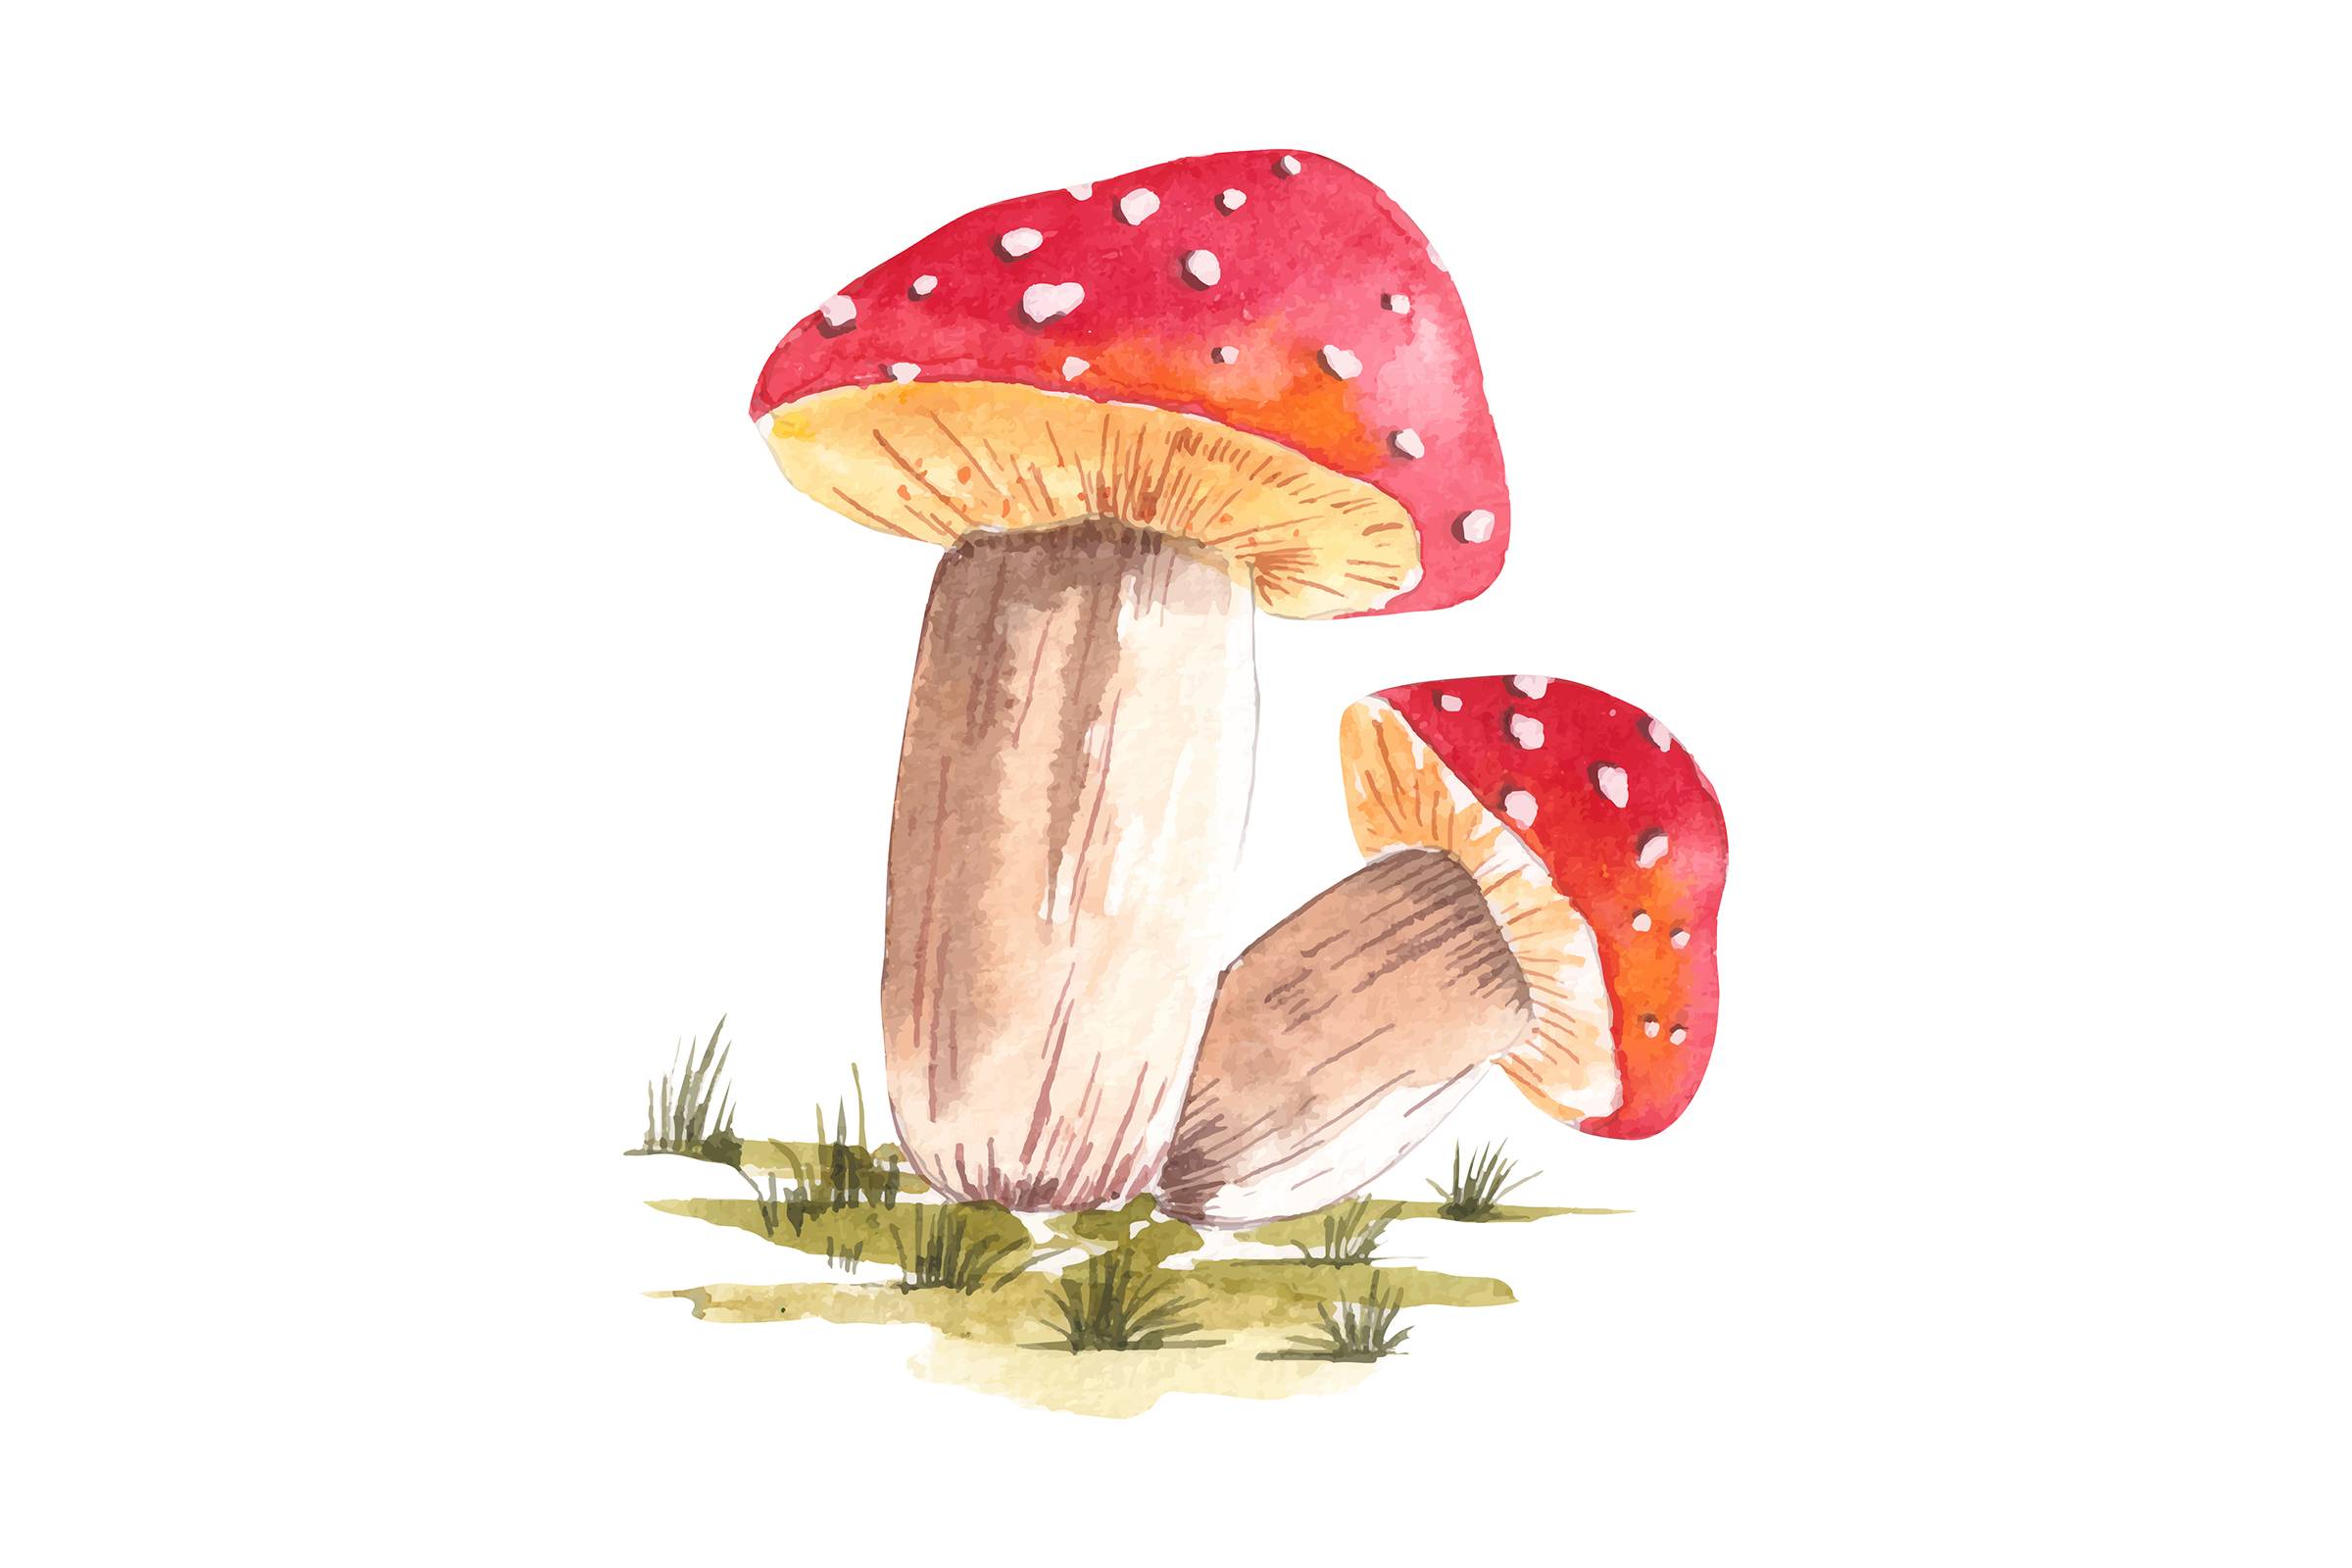 Watercolor illustration of a set of red mushrooms drawn by hand with watercolors